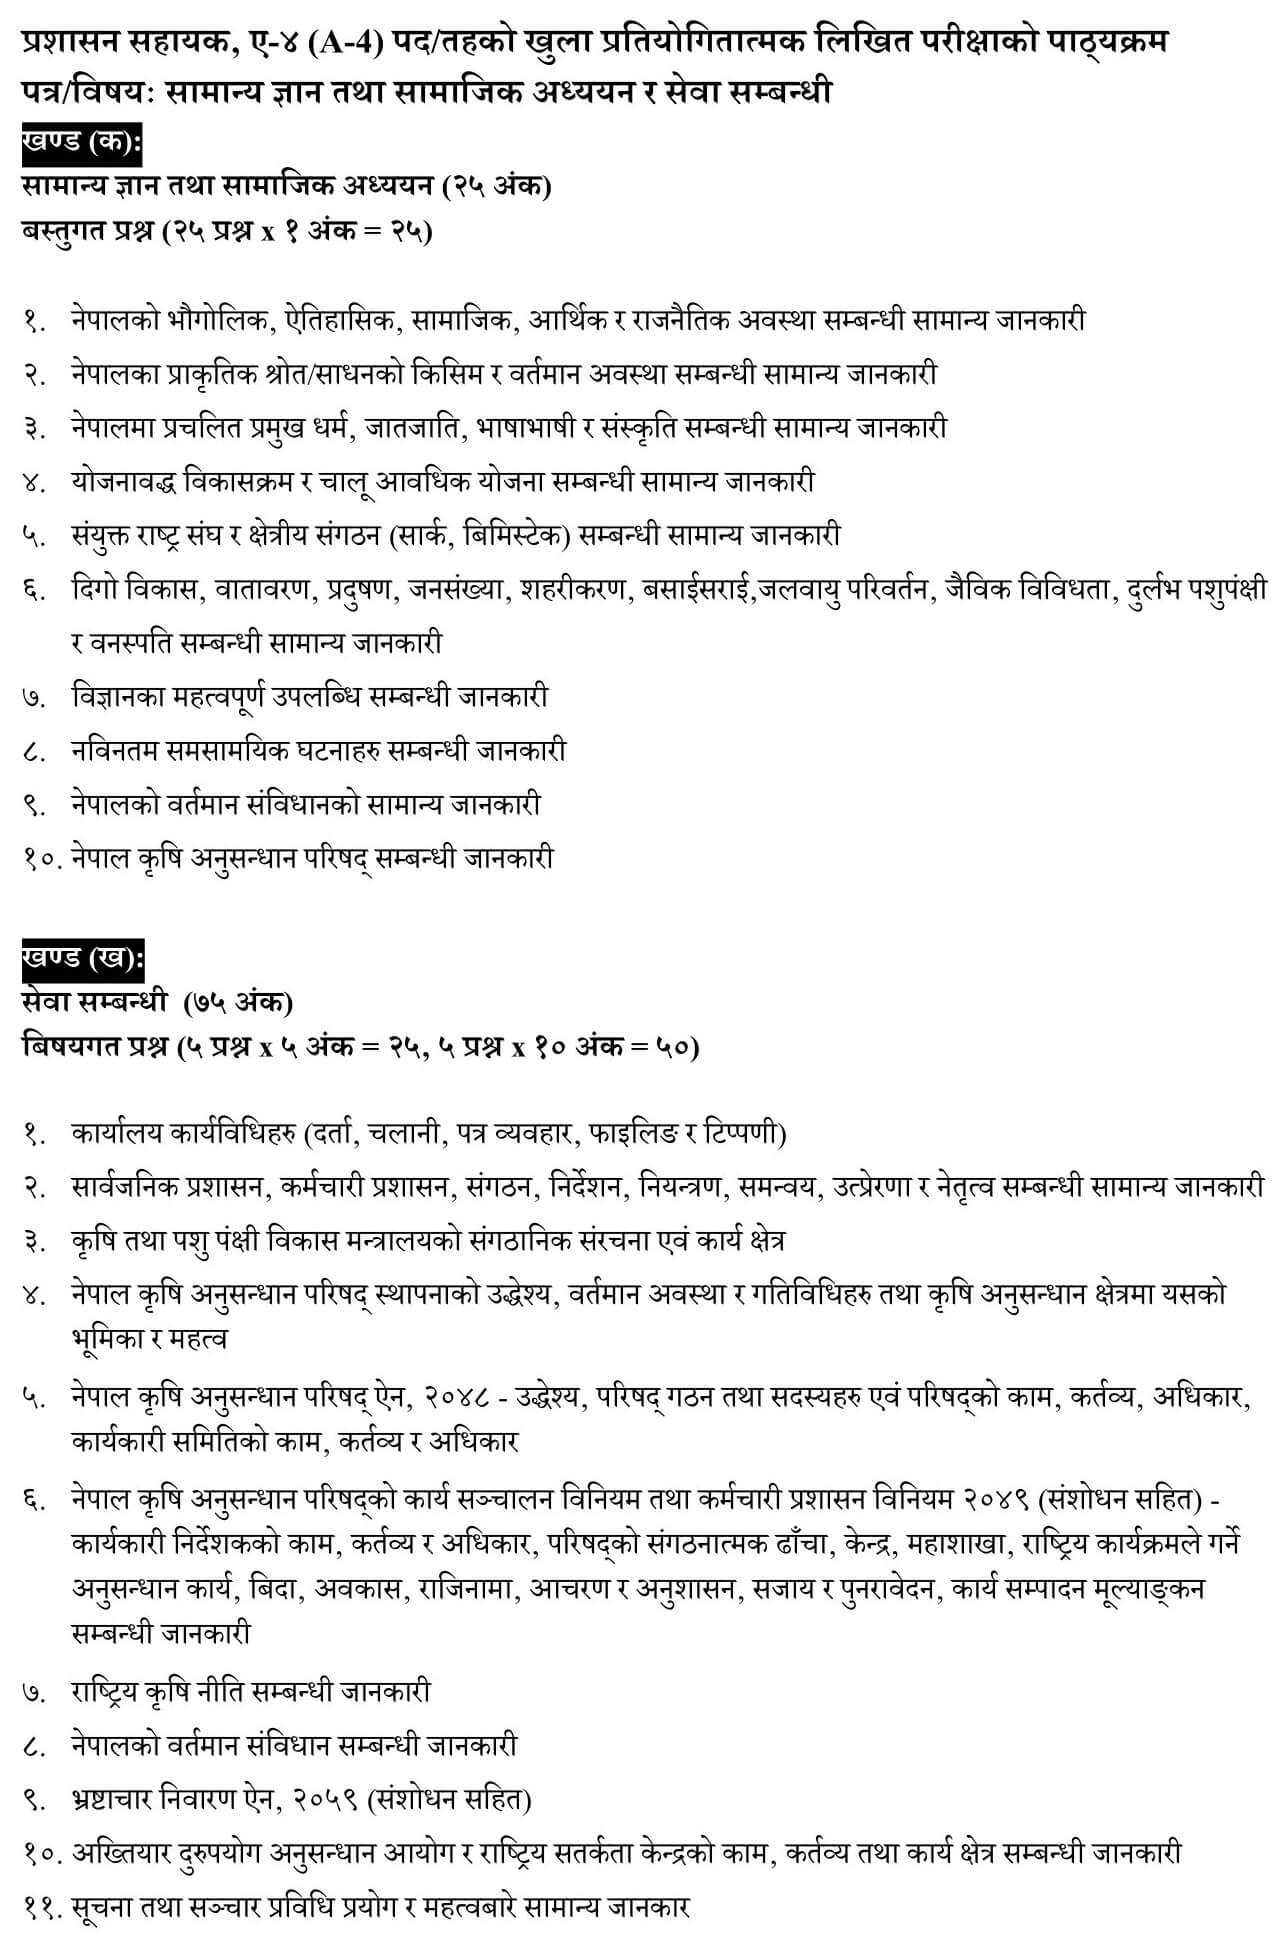 Nepal Agricultural Research Council Level 4 Assistant Administration Syllabus. NARC Level 4 Assistant Administration Syllabus. NARC Syllabus.